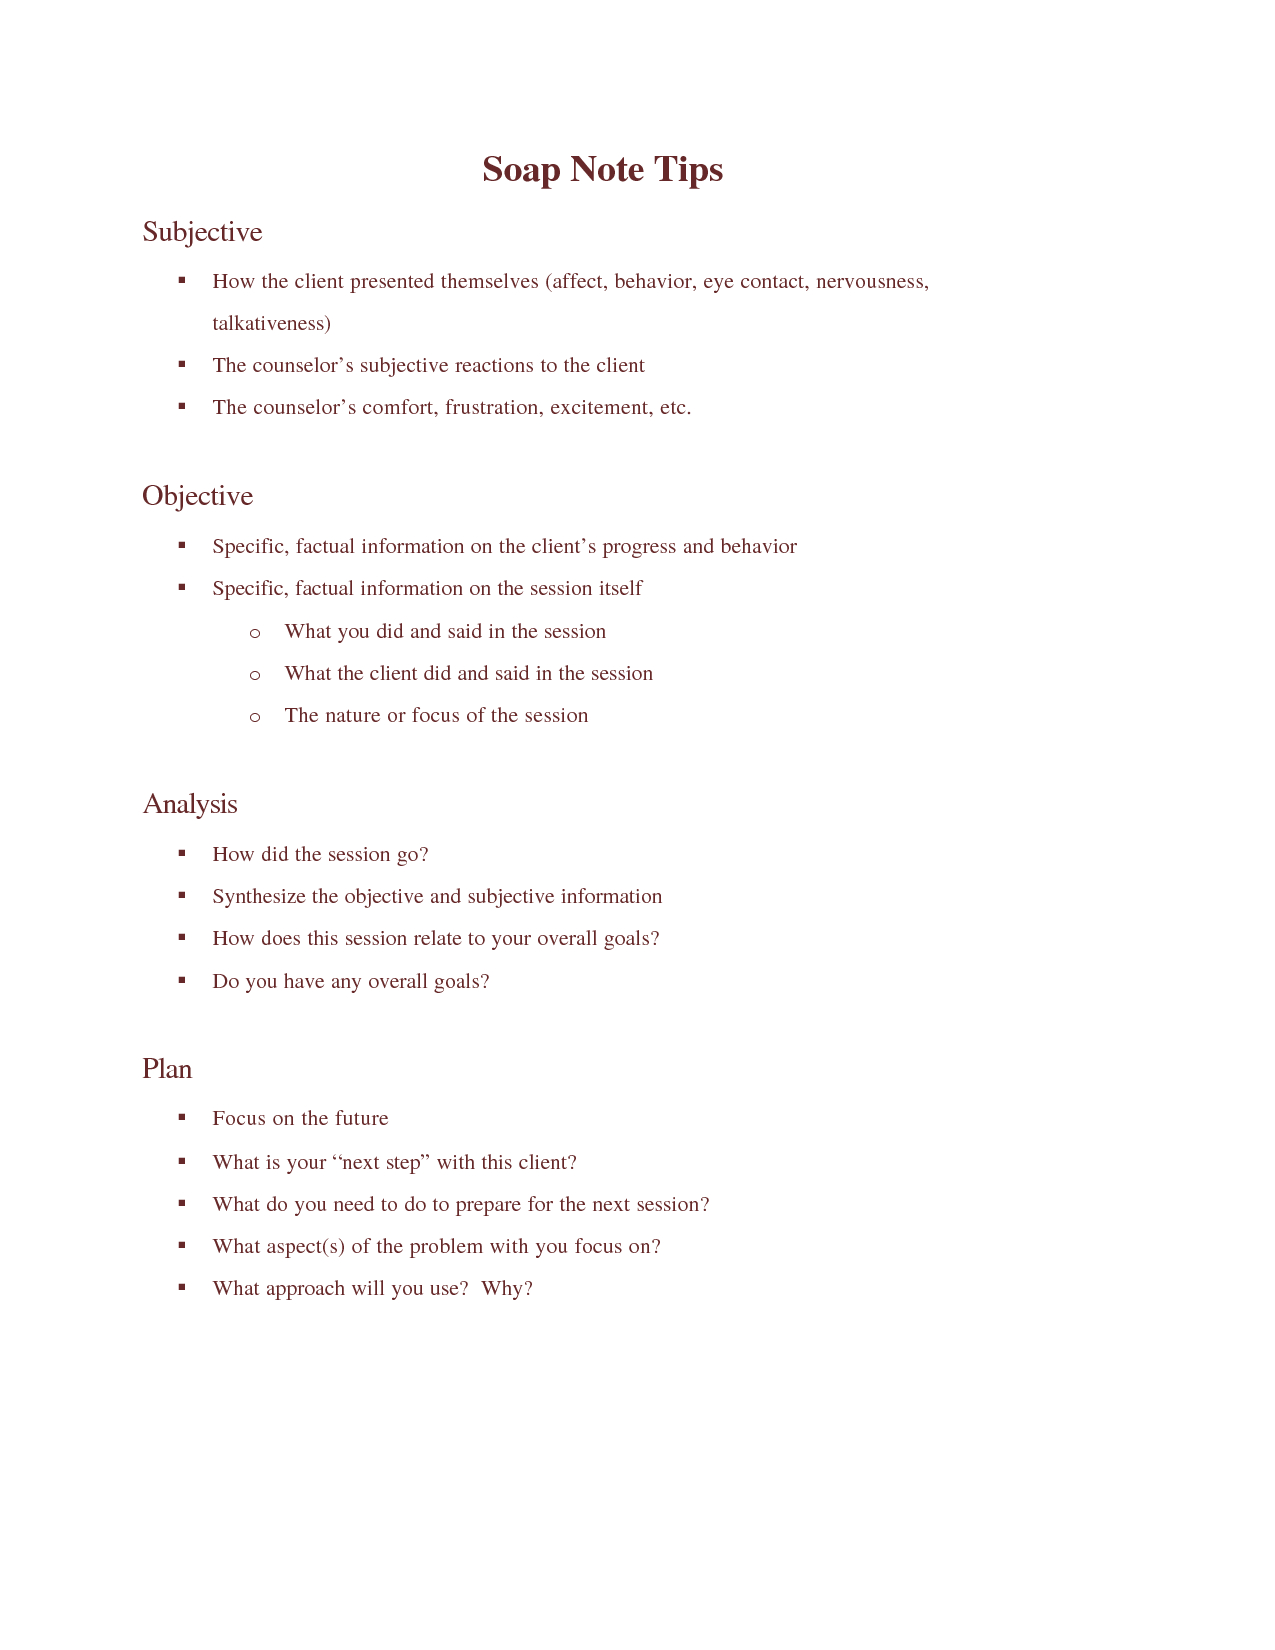 Sample Soap Note Template For Counseling | Soap Note, Notes Throughout Soap Report Template